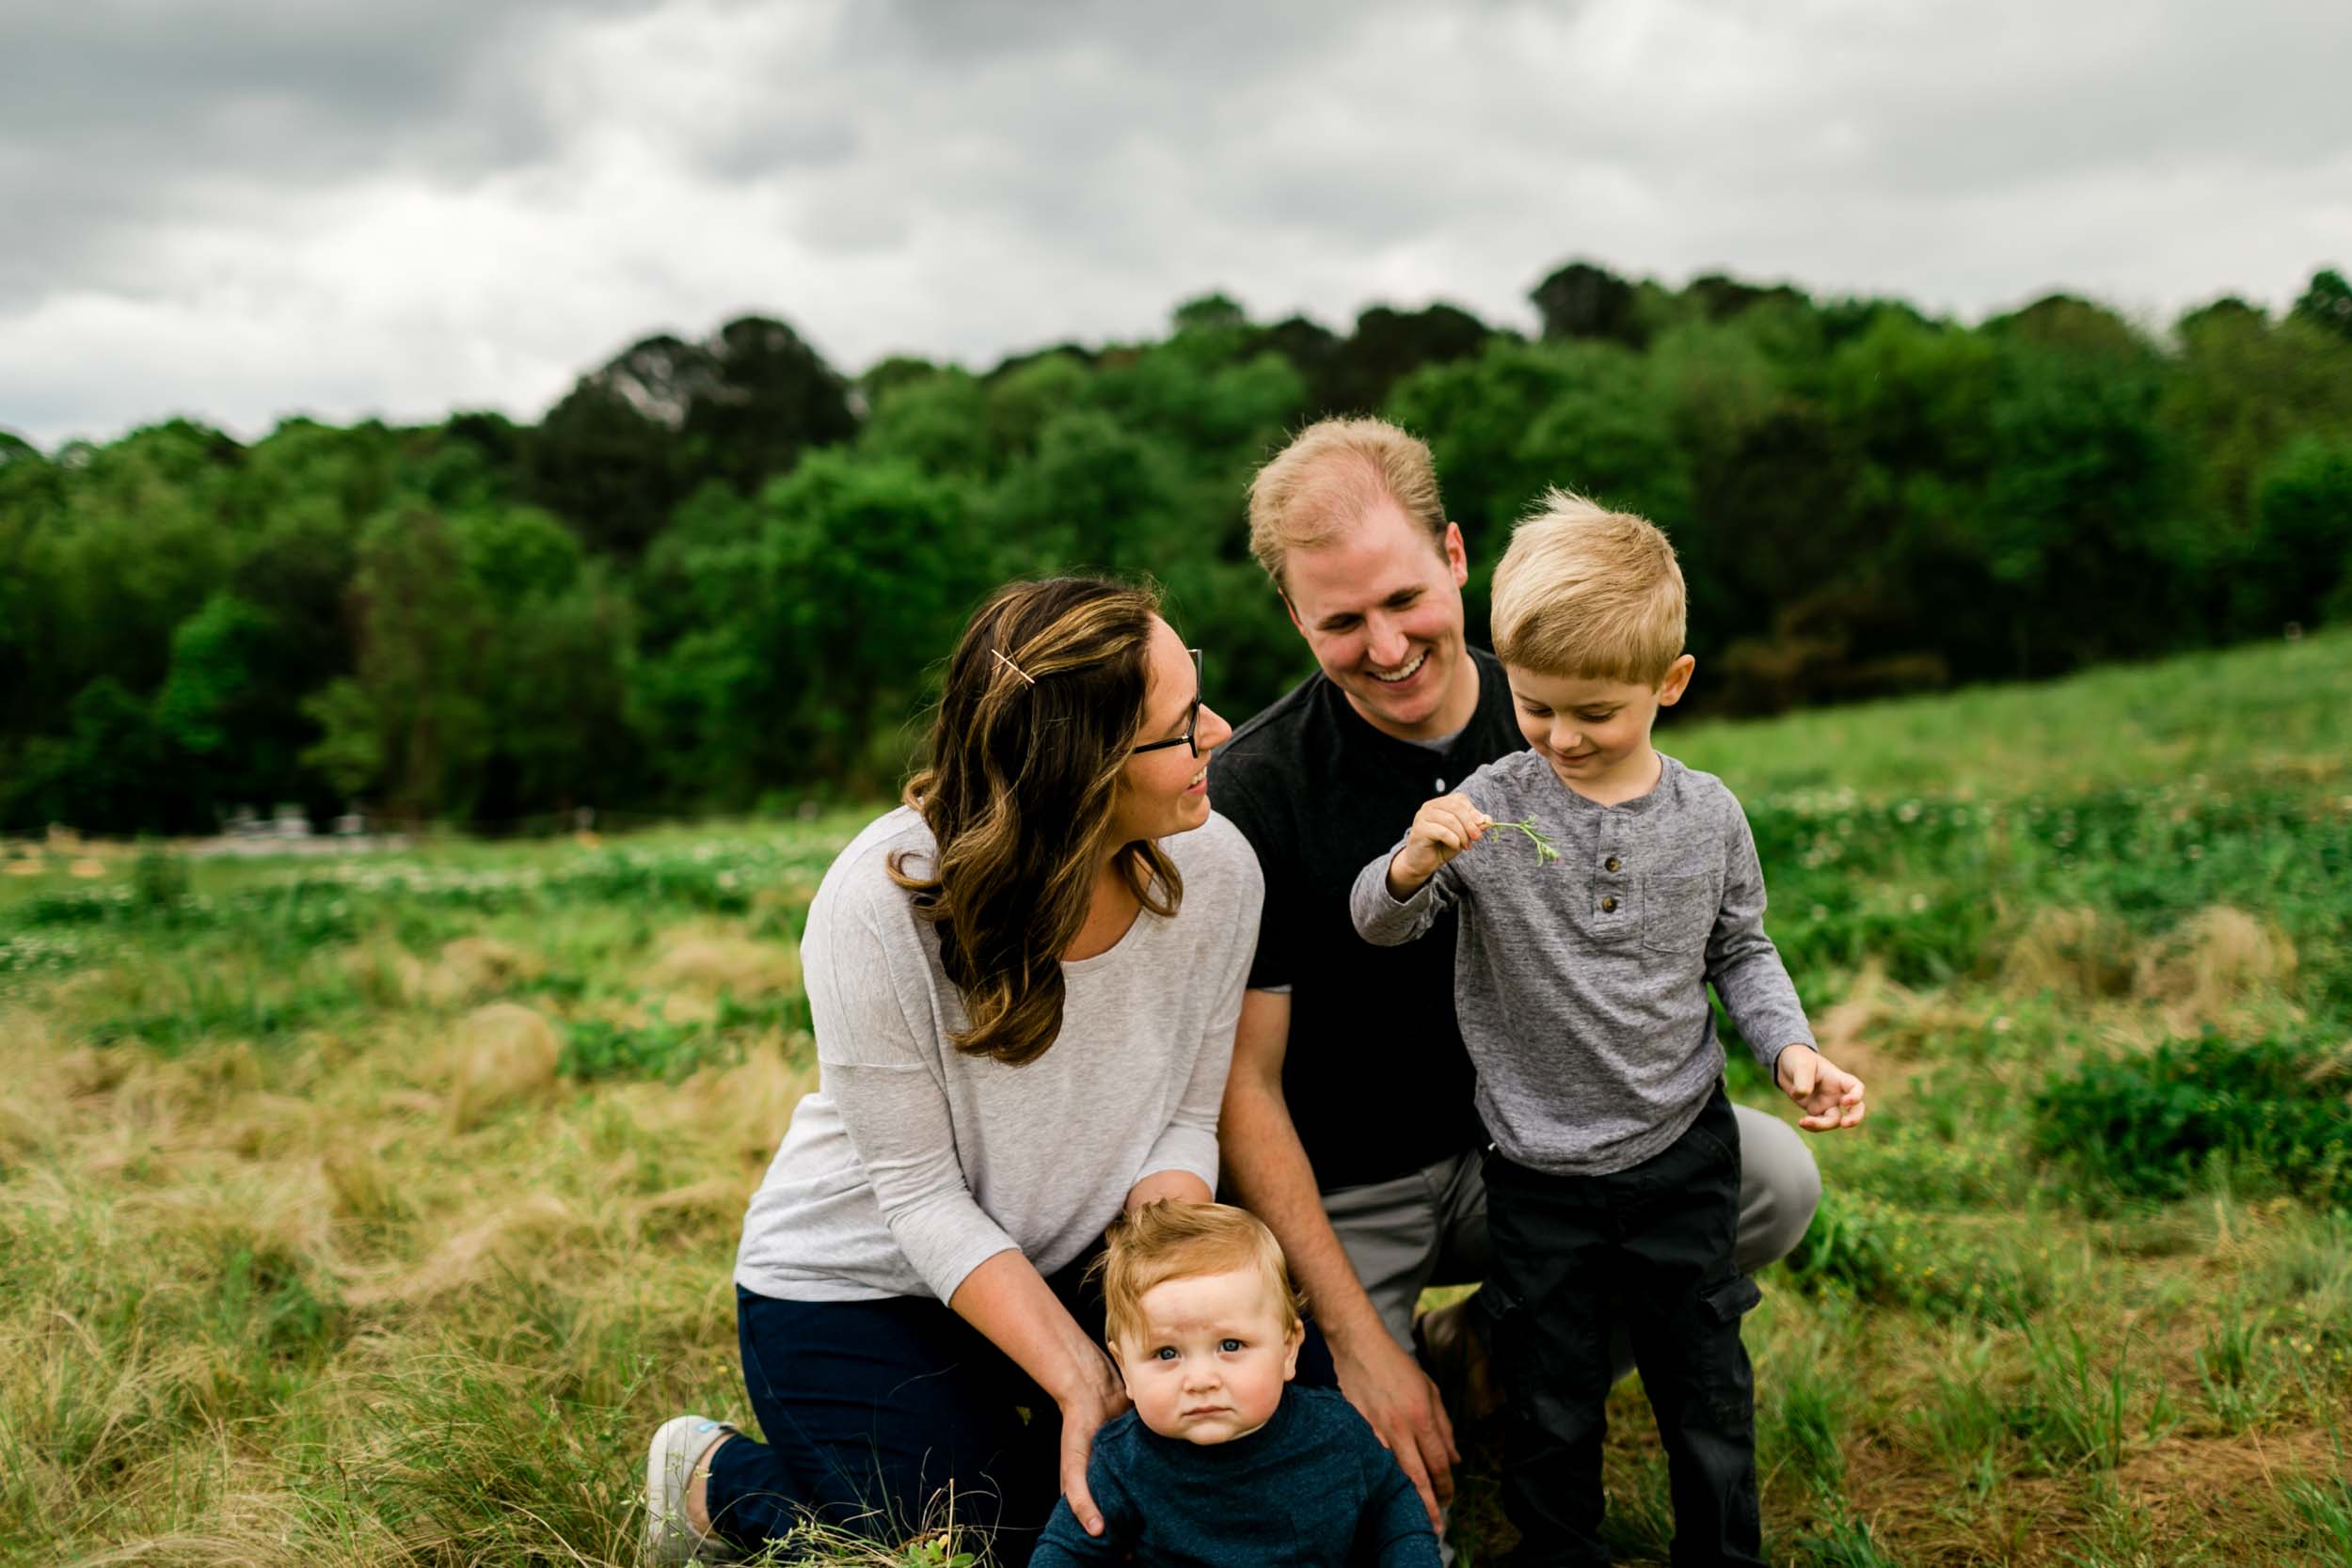 Organic family photo outside during spring time | Durham Family Photographer | By G. Lin Photography